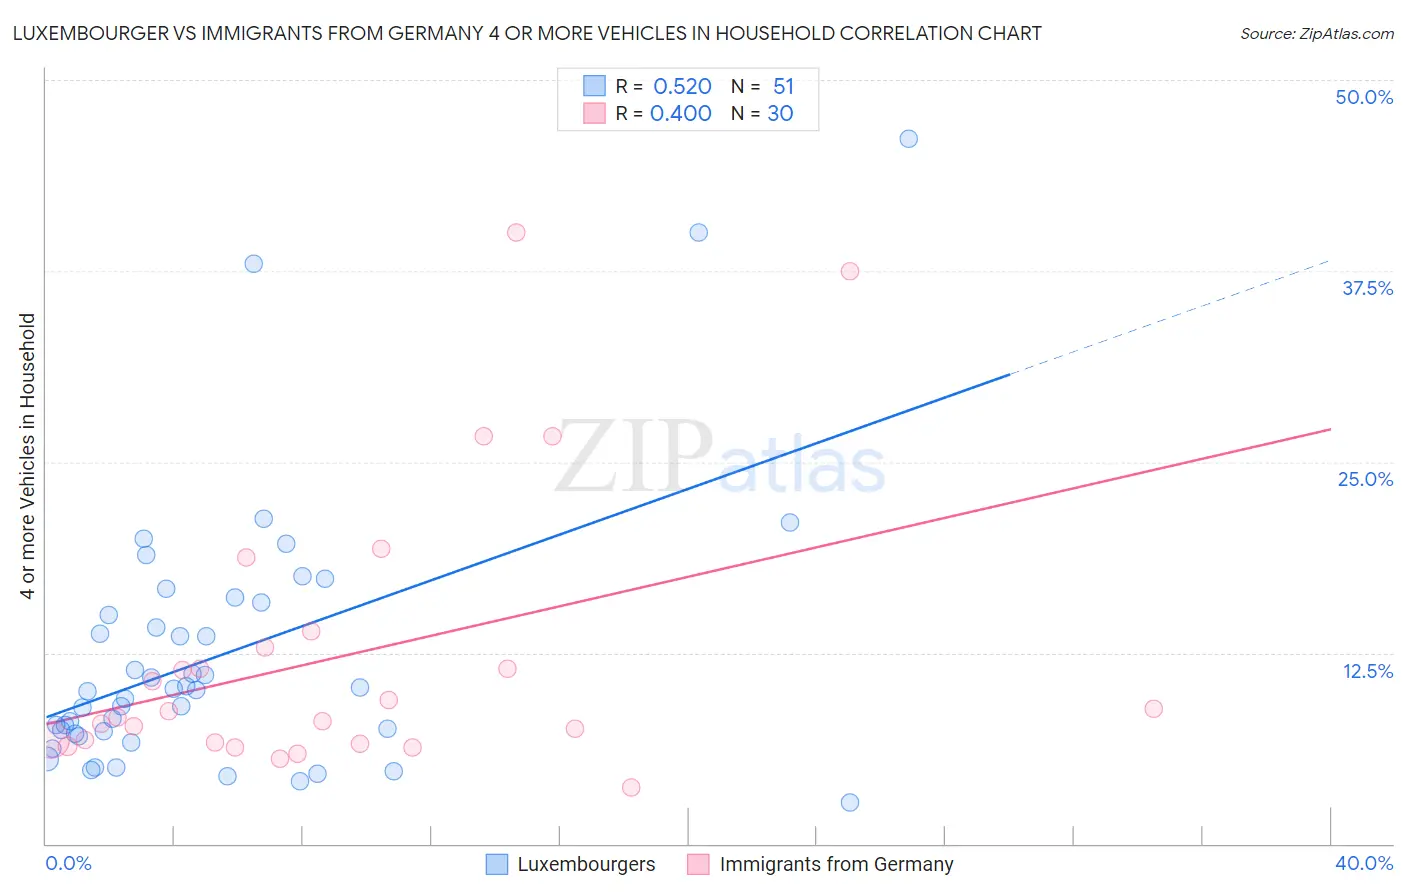 Luxembourger vs Immigrants from Germany 4 or more Vehicles in Household